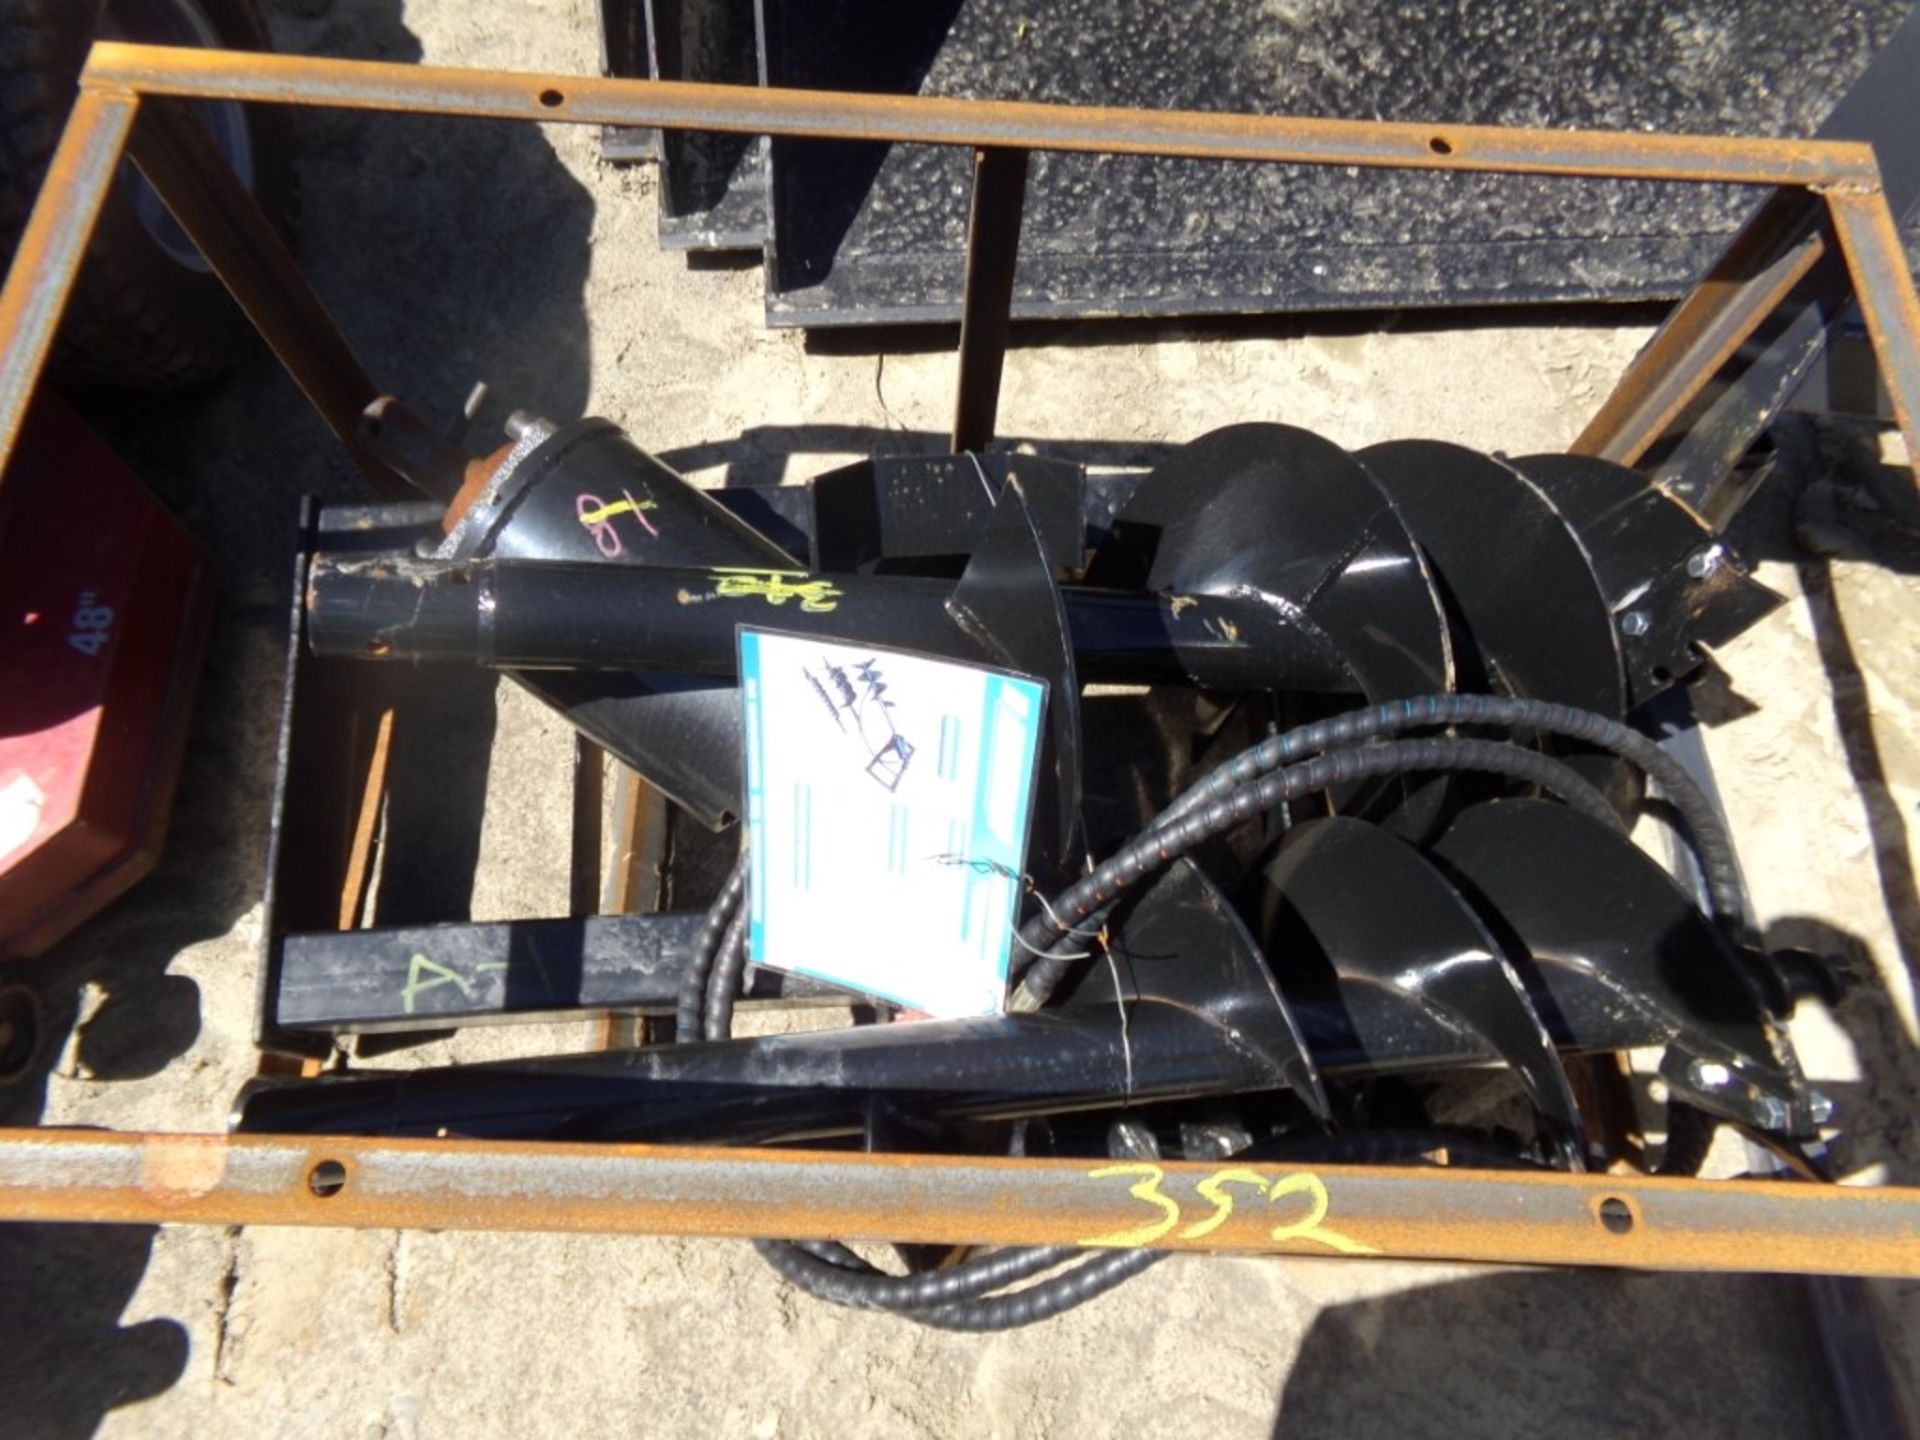 New Heavy Duty Skid Steer Auger with (3) Bits, 6'', 12'' and 14'' - Image 2 of 2